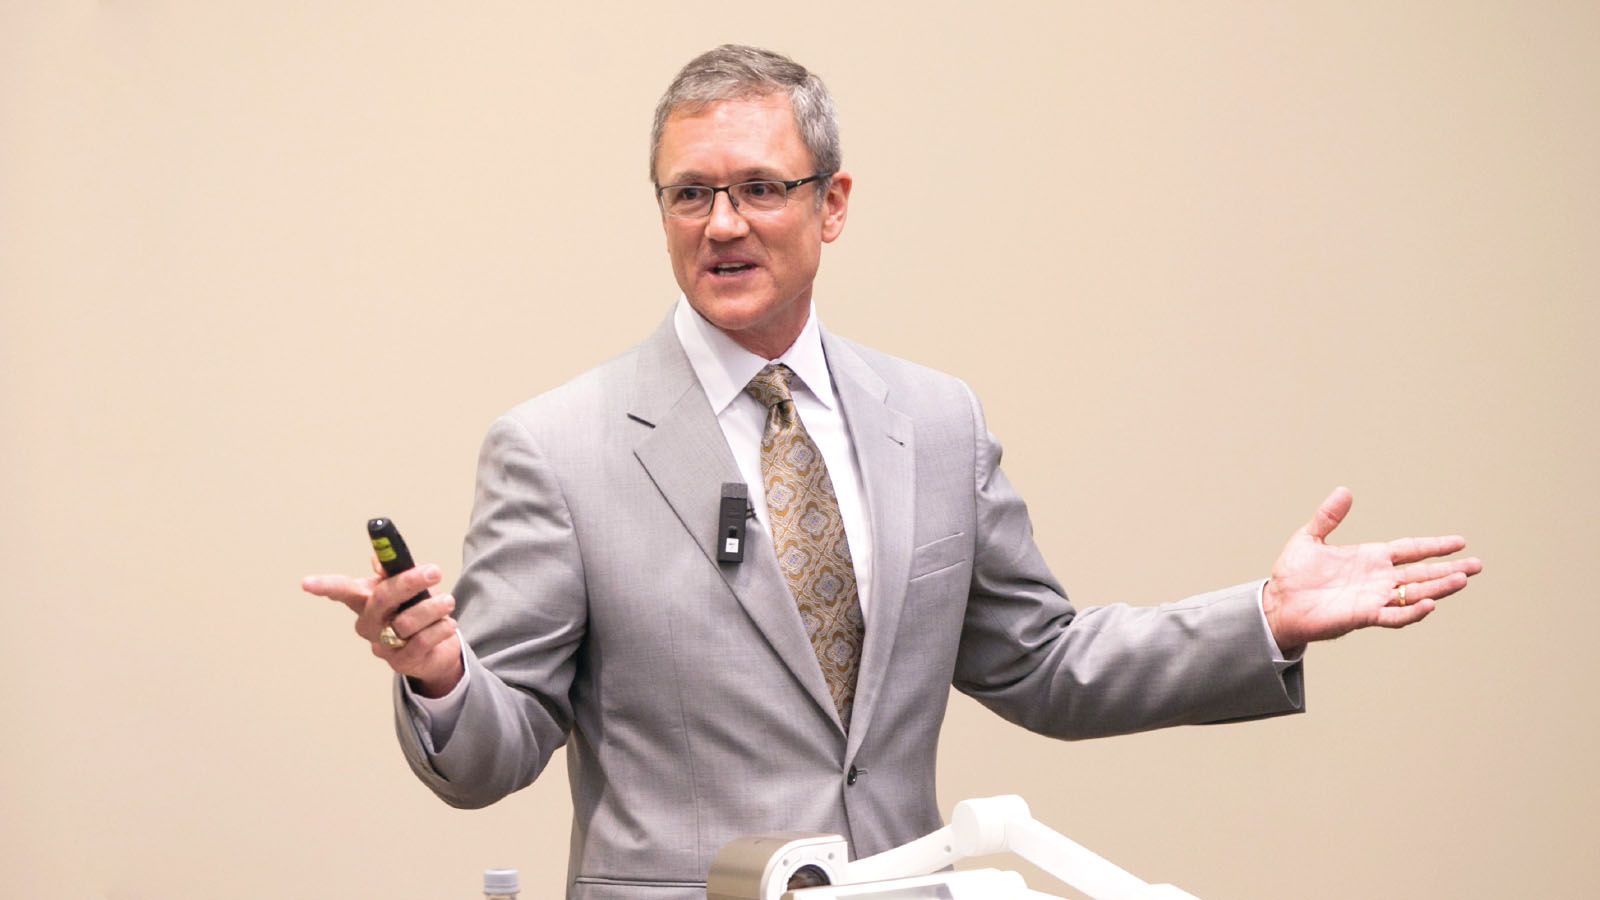 A. Dale Whittaker joins UCF as provost and vice president for academic affairs